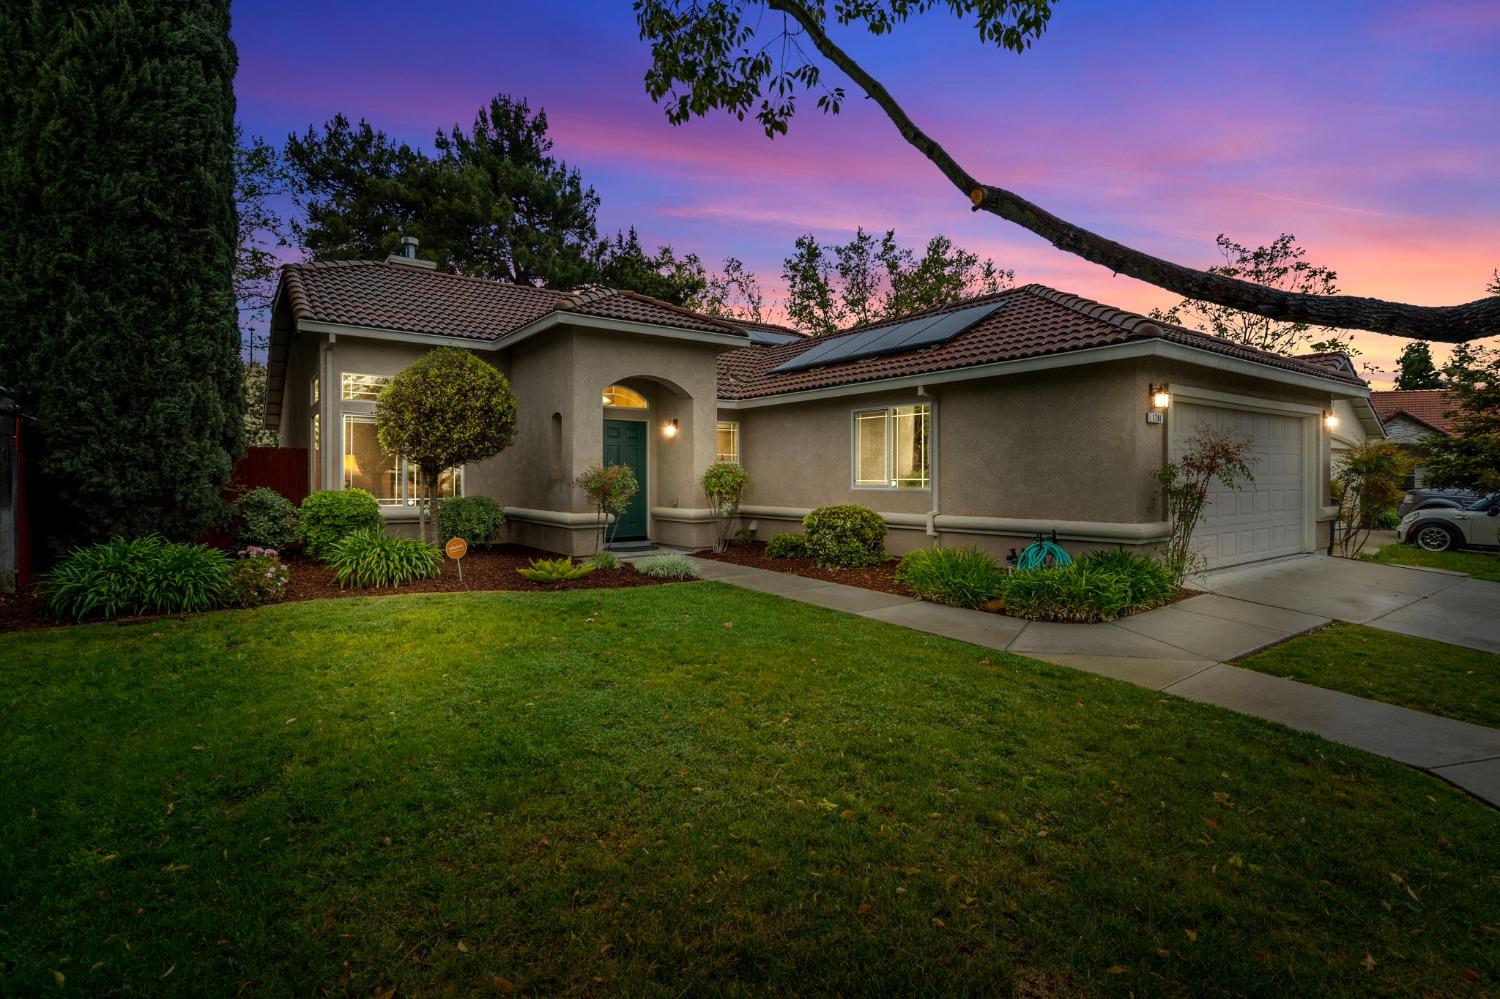 Photo of 1791 Blossomwood Ln in Tracy, CA